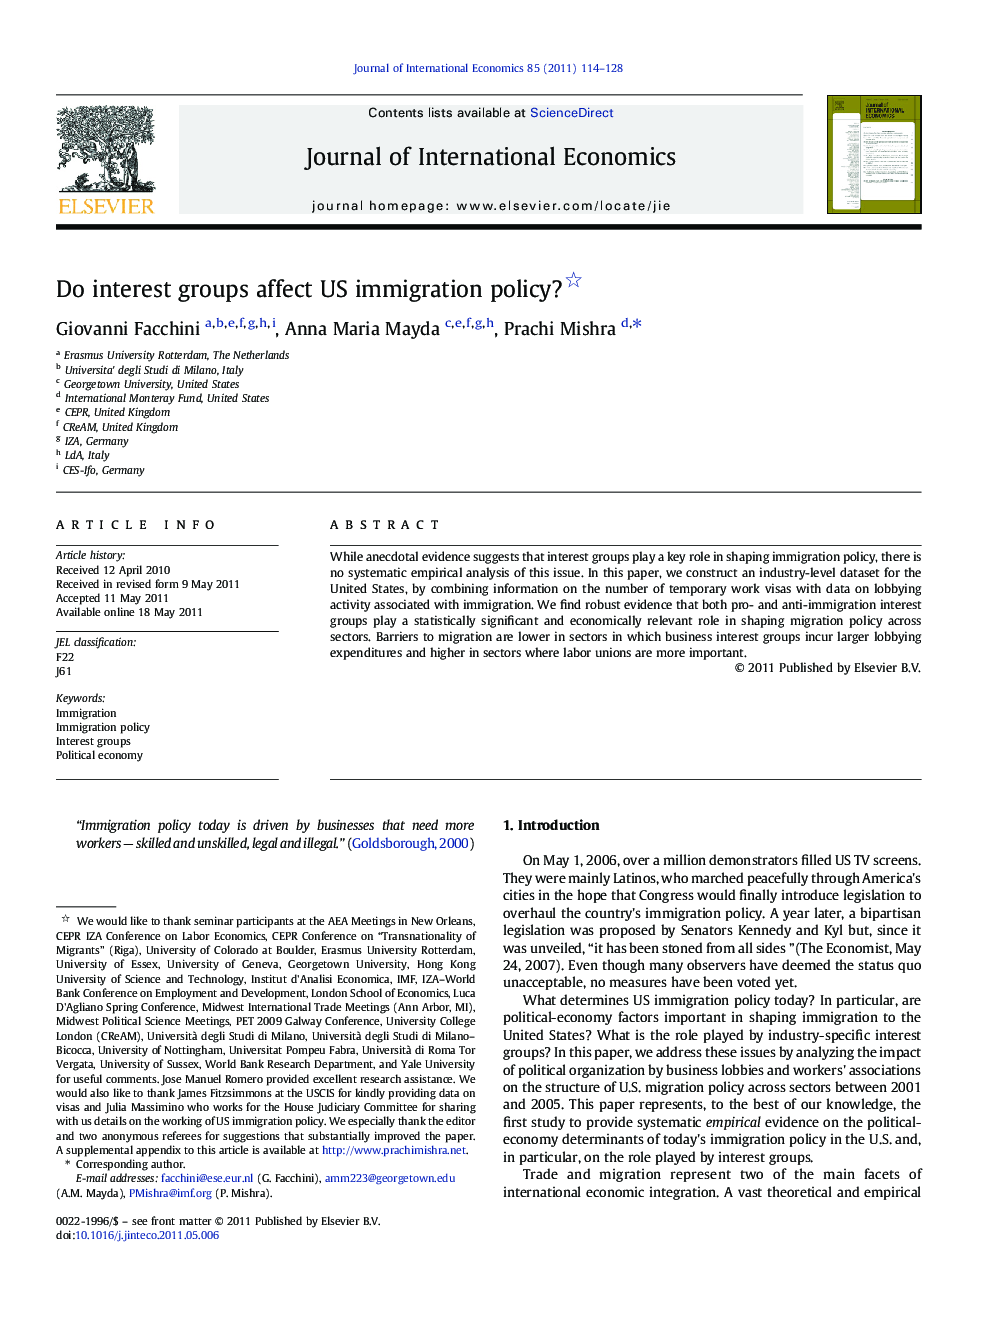 Do interest groups affect US immigration policy?